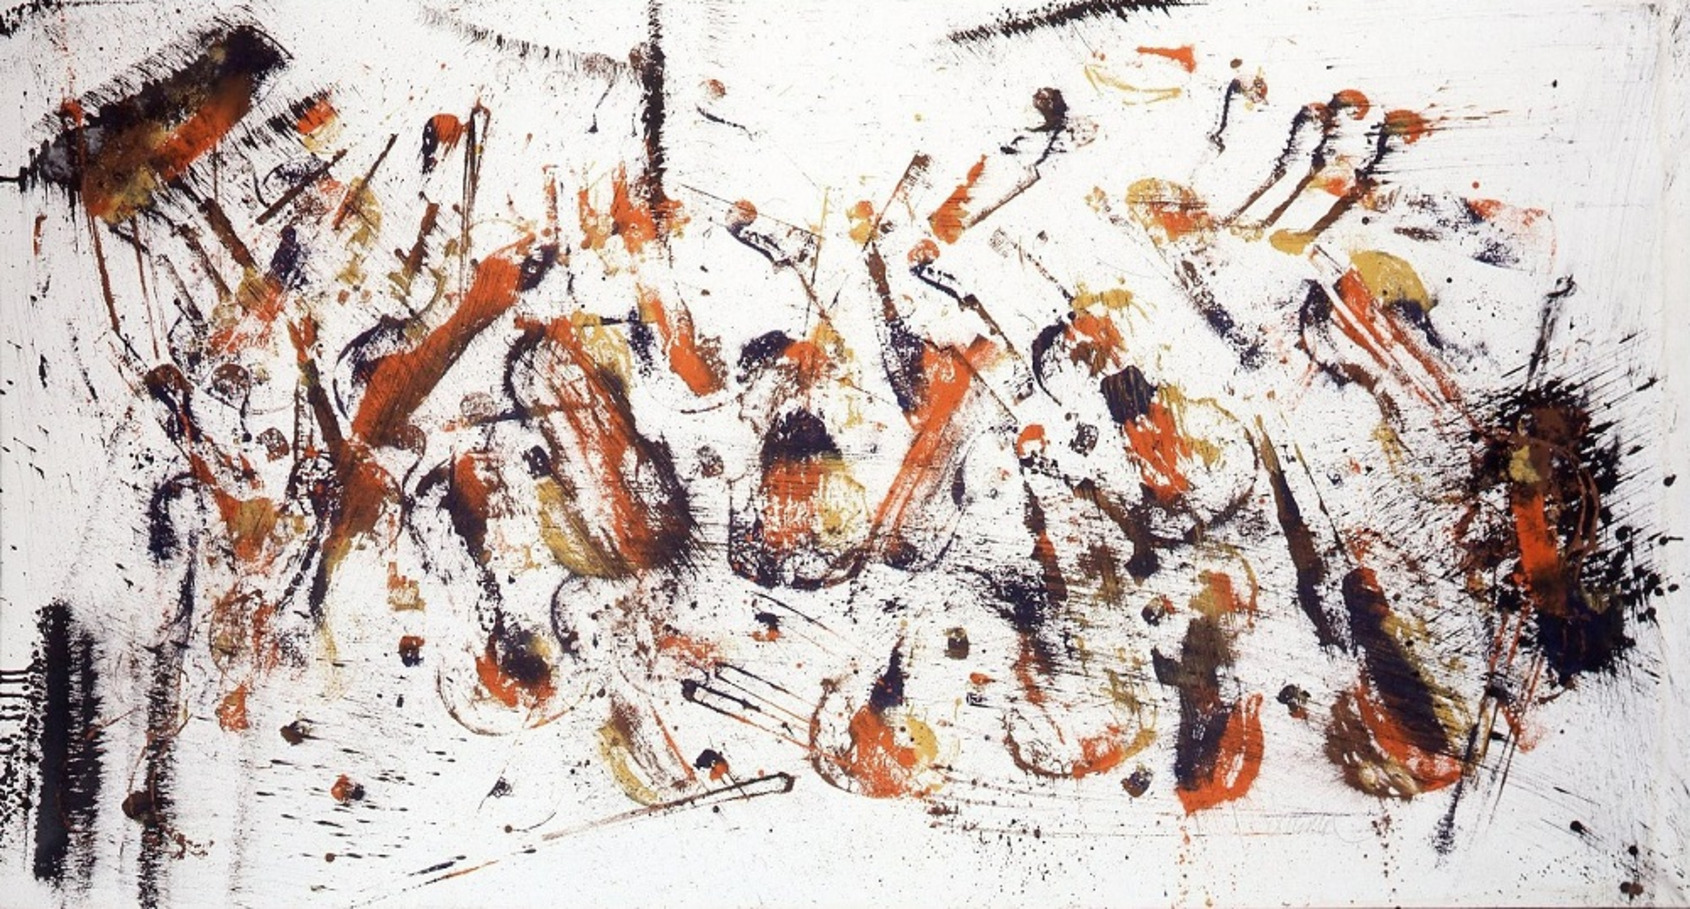 Saga, Arman, 1975, 124x230cm. Casein on paper mounted on canvas, traces of violins and bows. Courtesy of The Arman Marital Trust. 